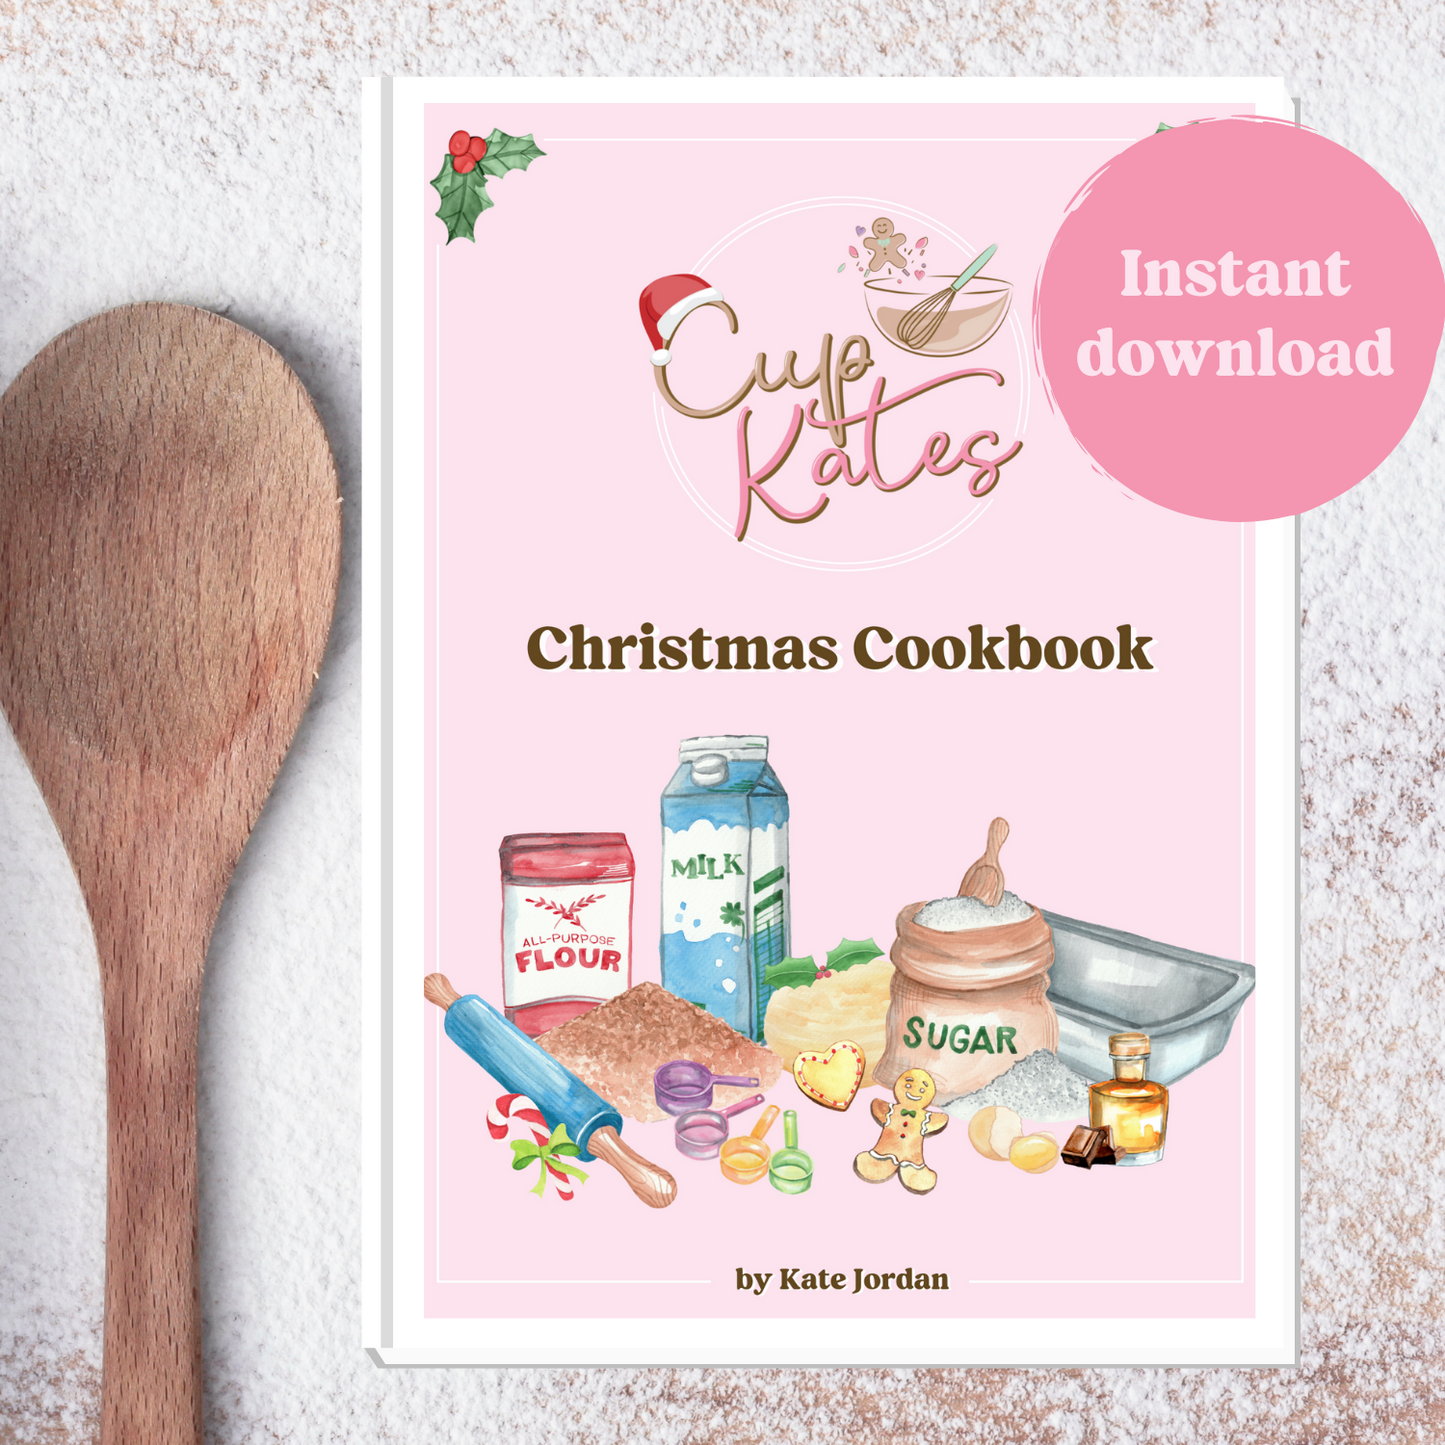 Christmas Cookbook by Cupkates